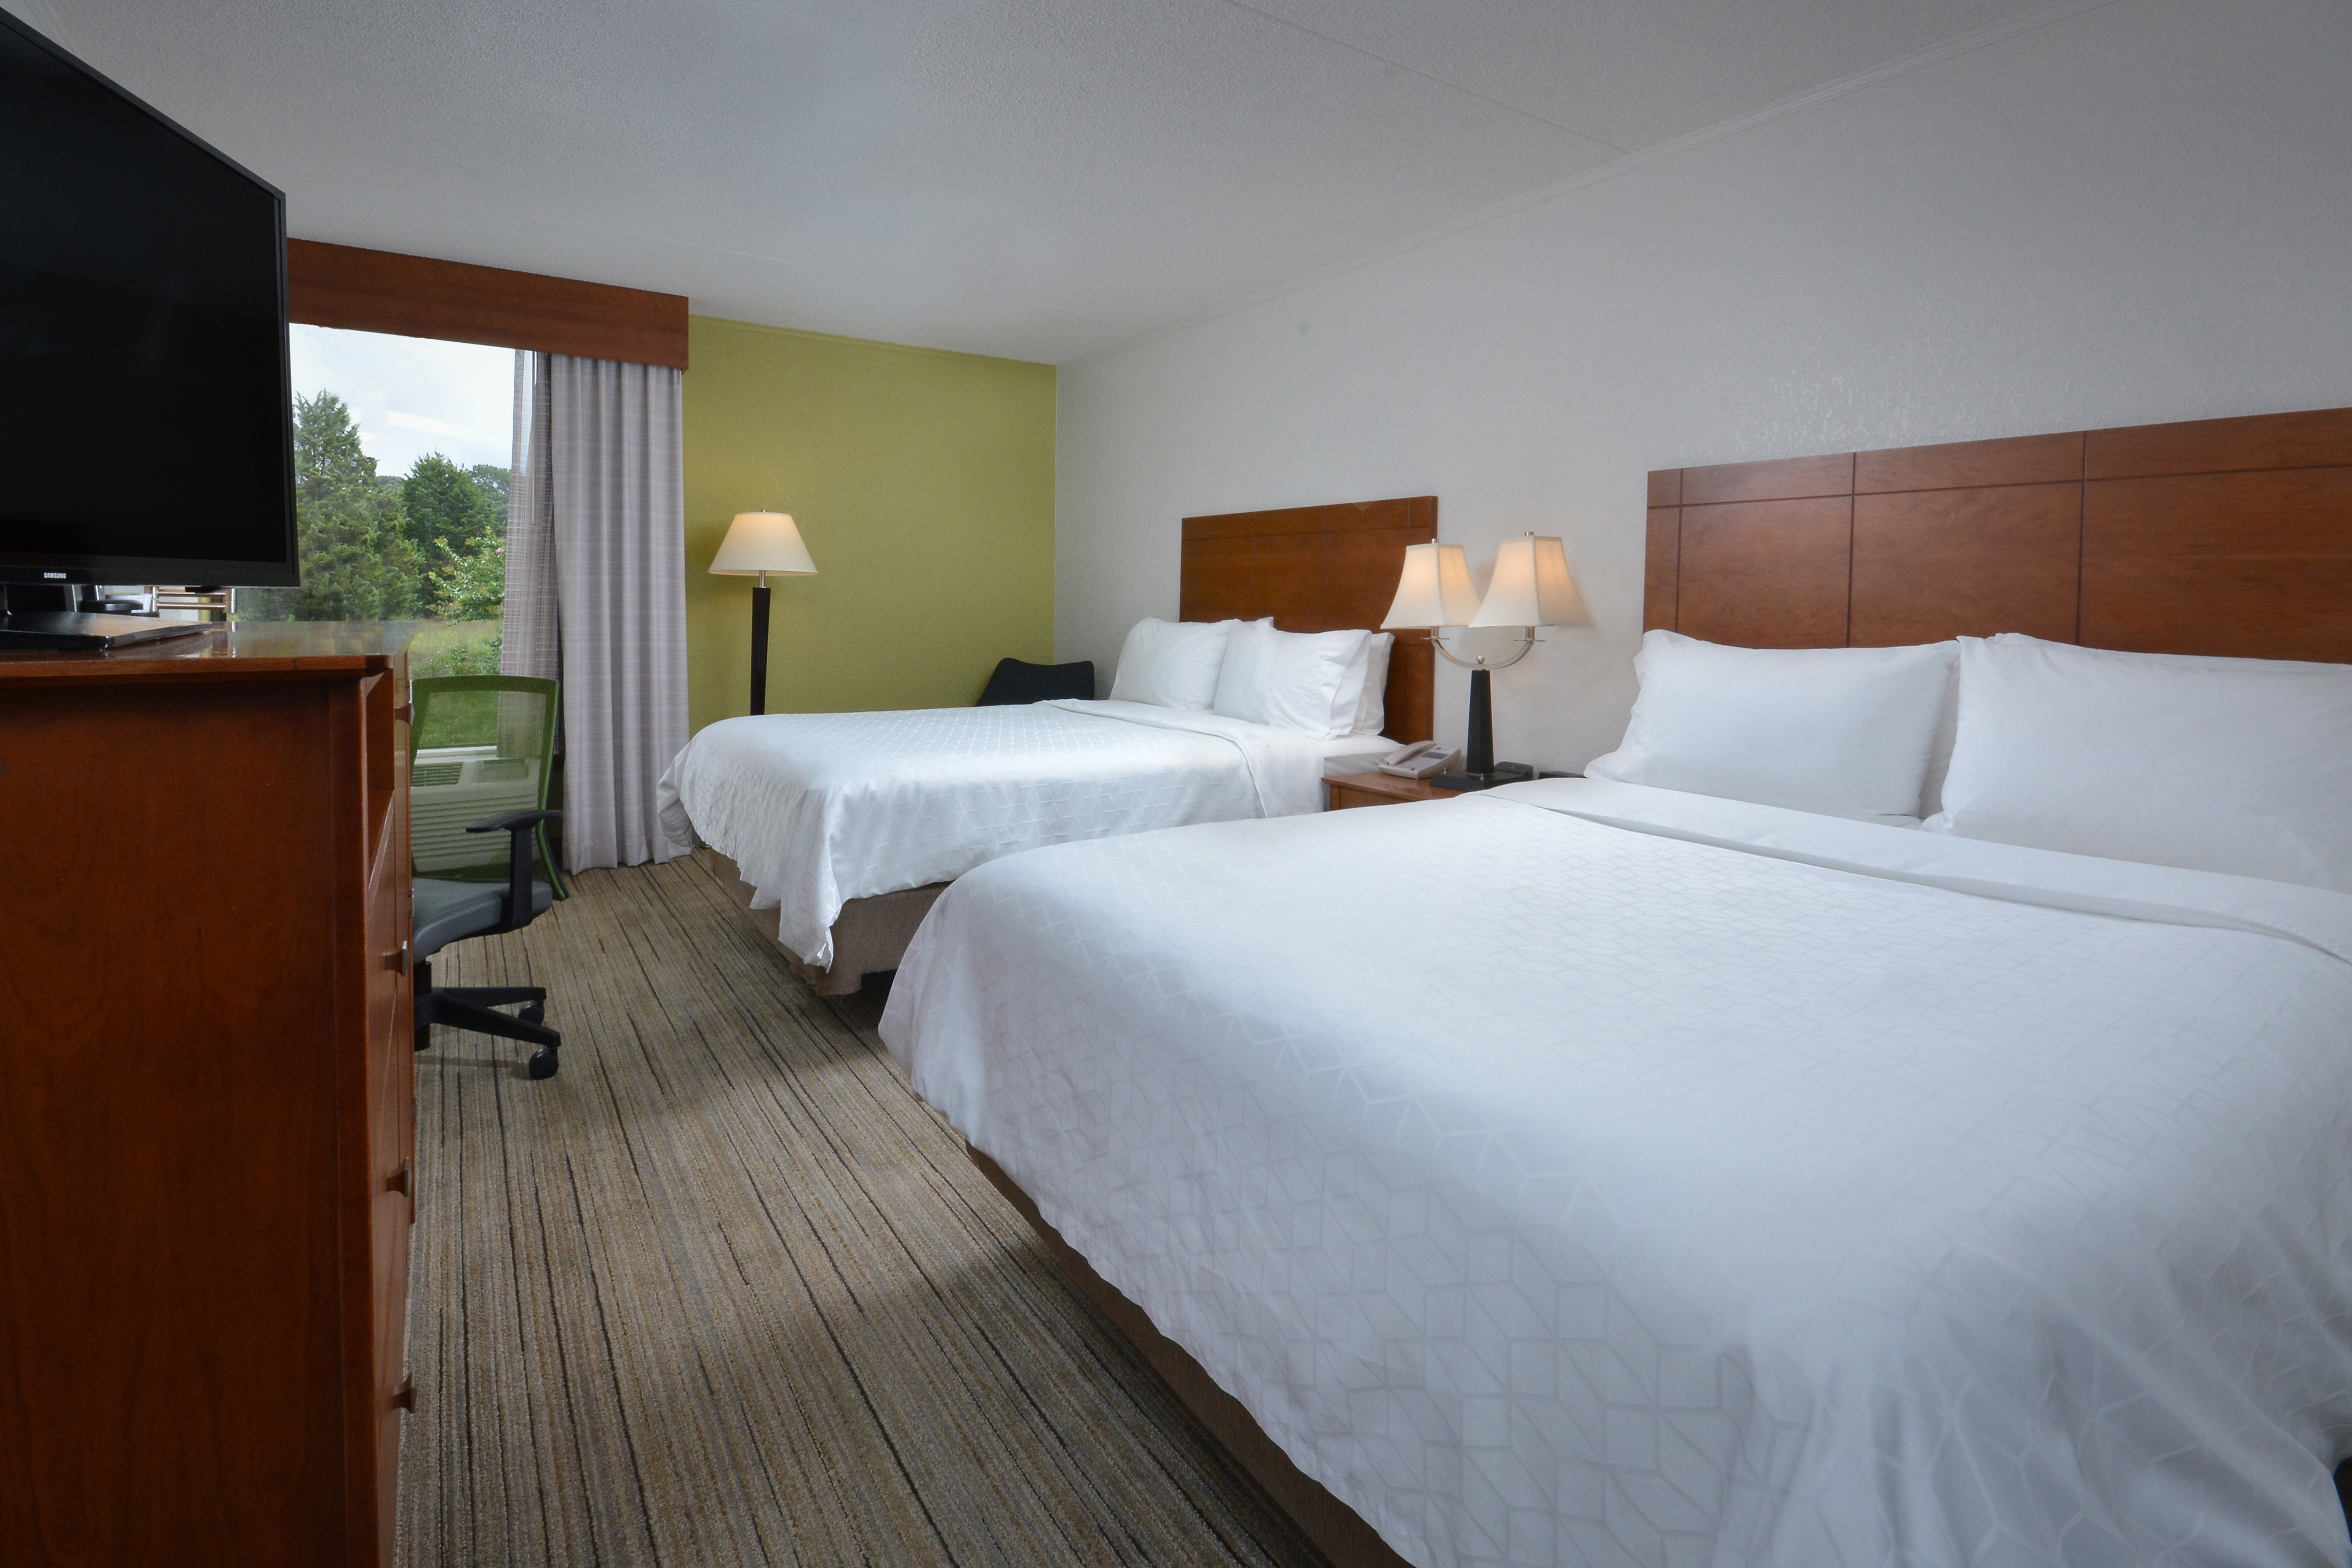 Double Queen rooms are ideal for an affordable stay in Lynchburg.